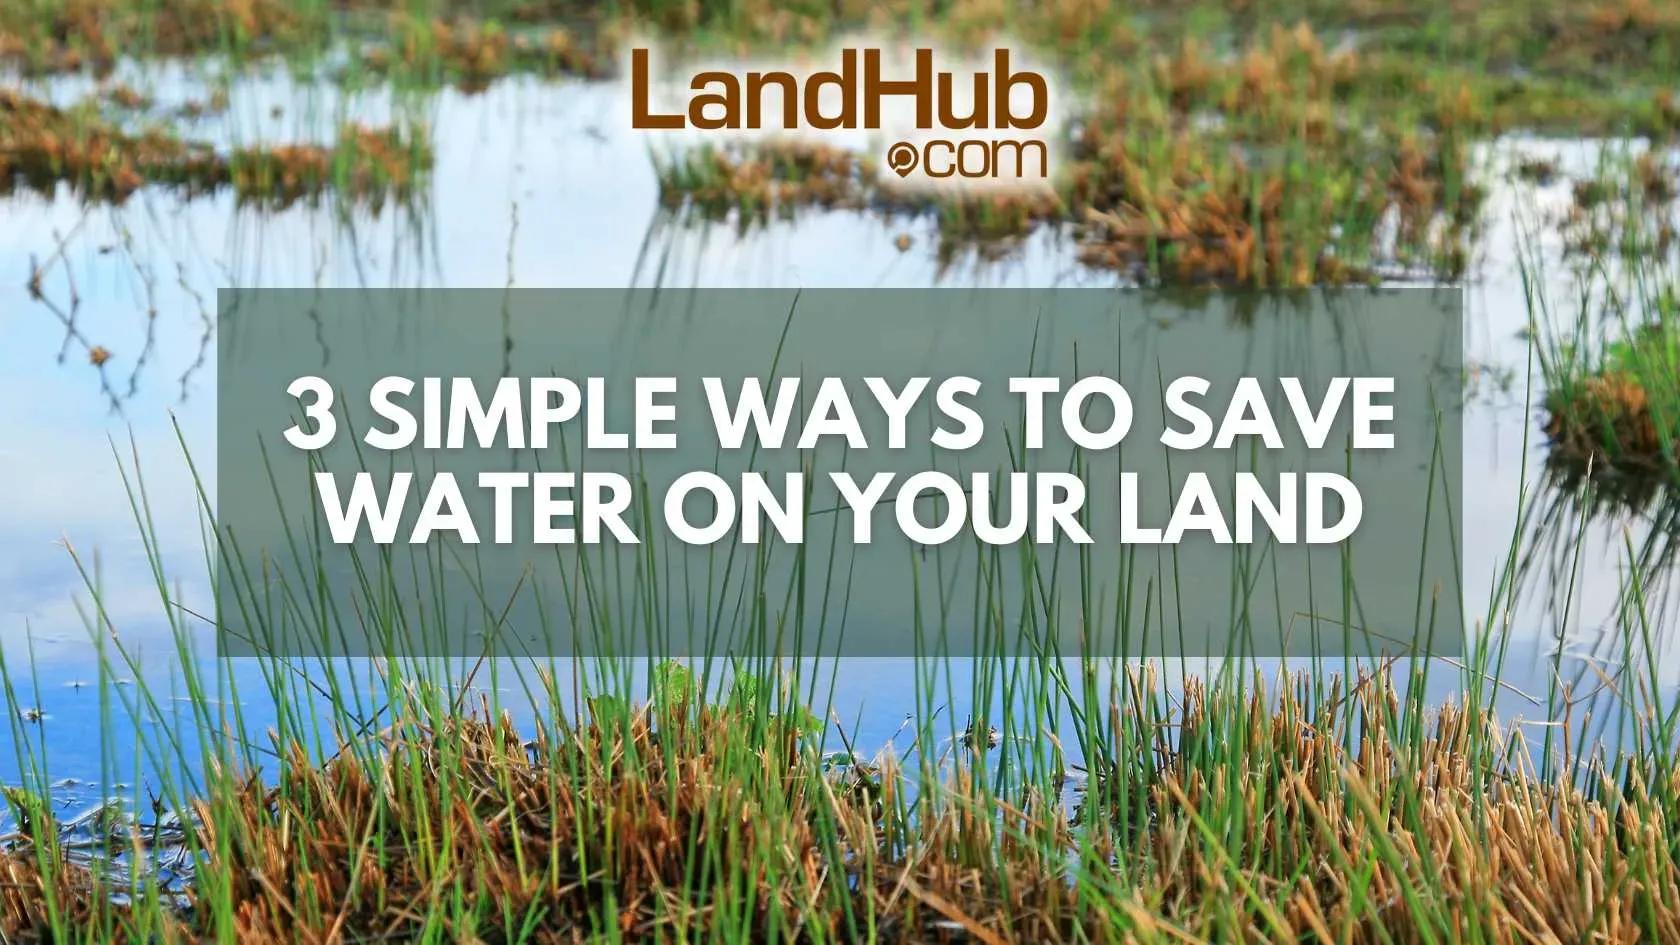 3 simple ways to save water on your land